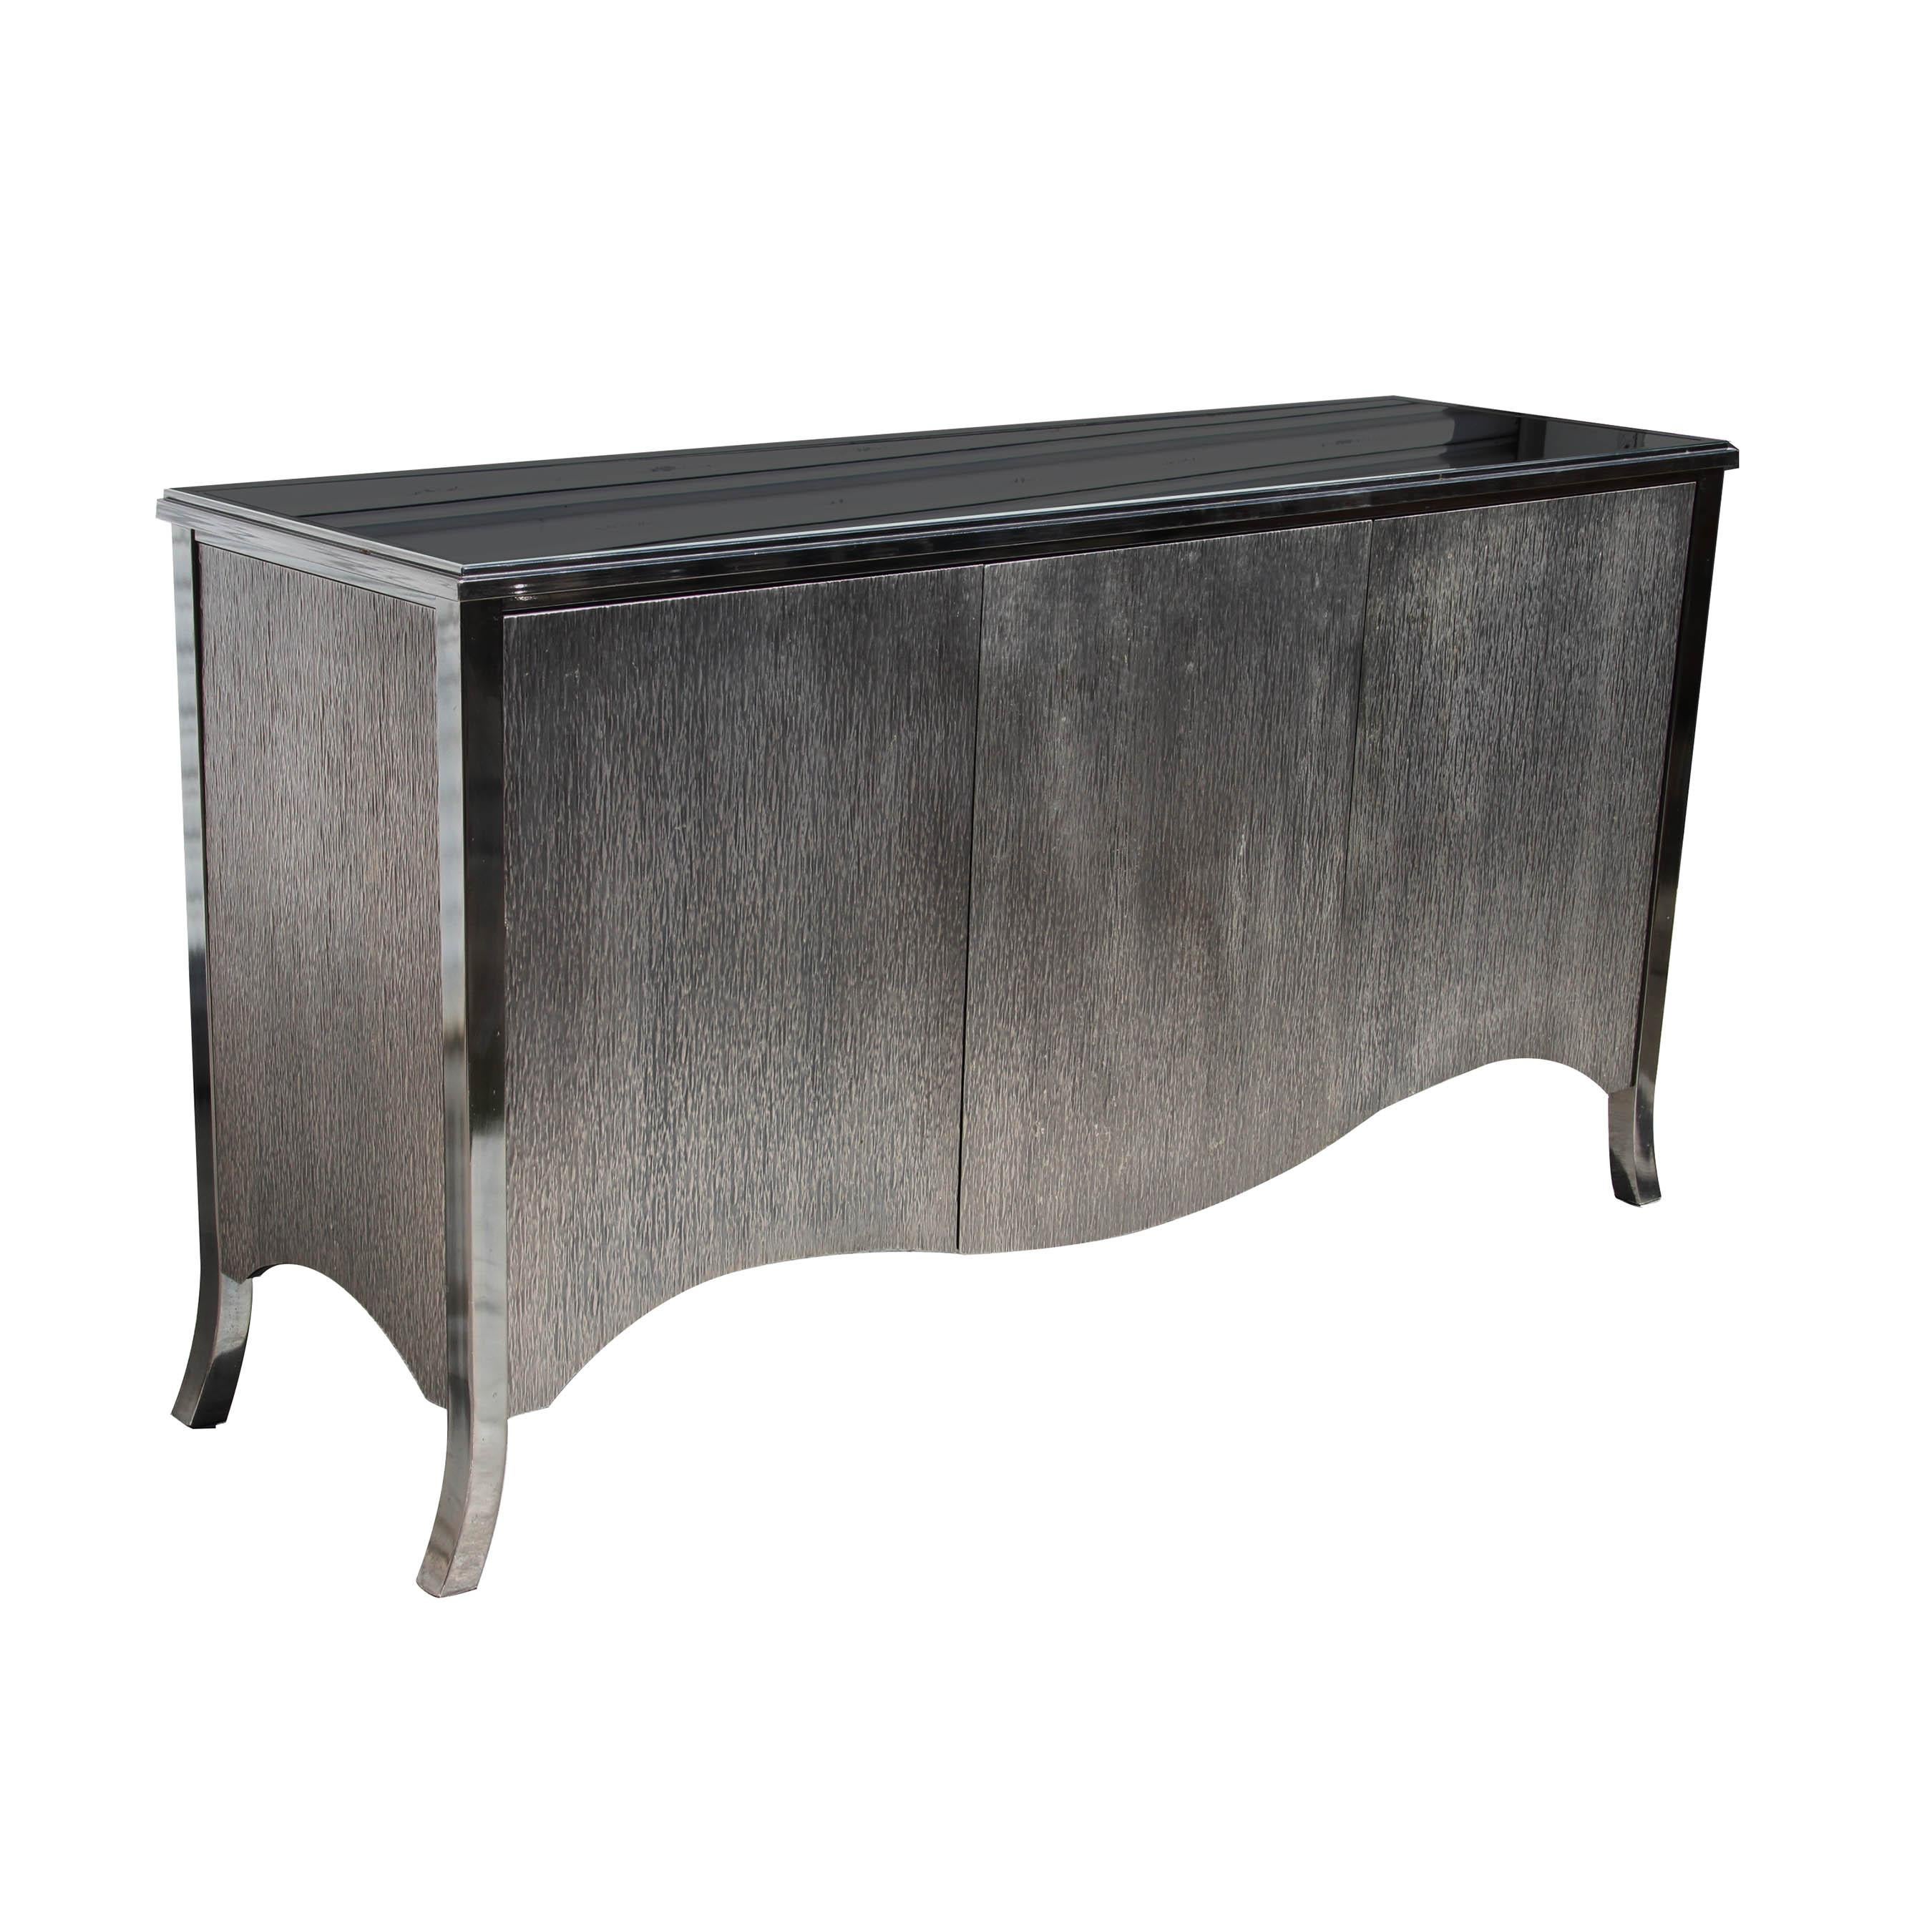 Design Institute America
2000s

Stunning three-door buffet has an inset black glass top and adjustable height interior shelves. The door fronts and sides are clad in heavy-gauge embossed steel. 


Overall dimensions: Width: 63 inches, Height: 35